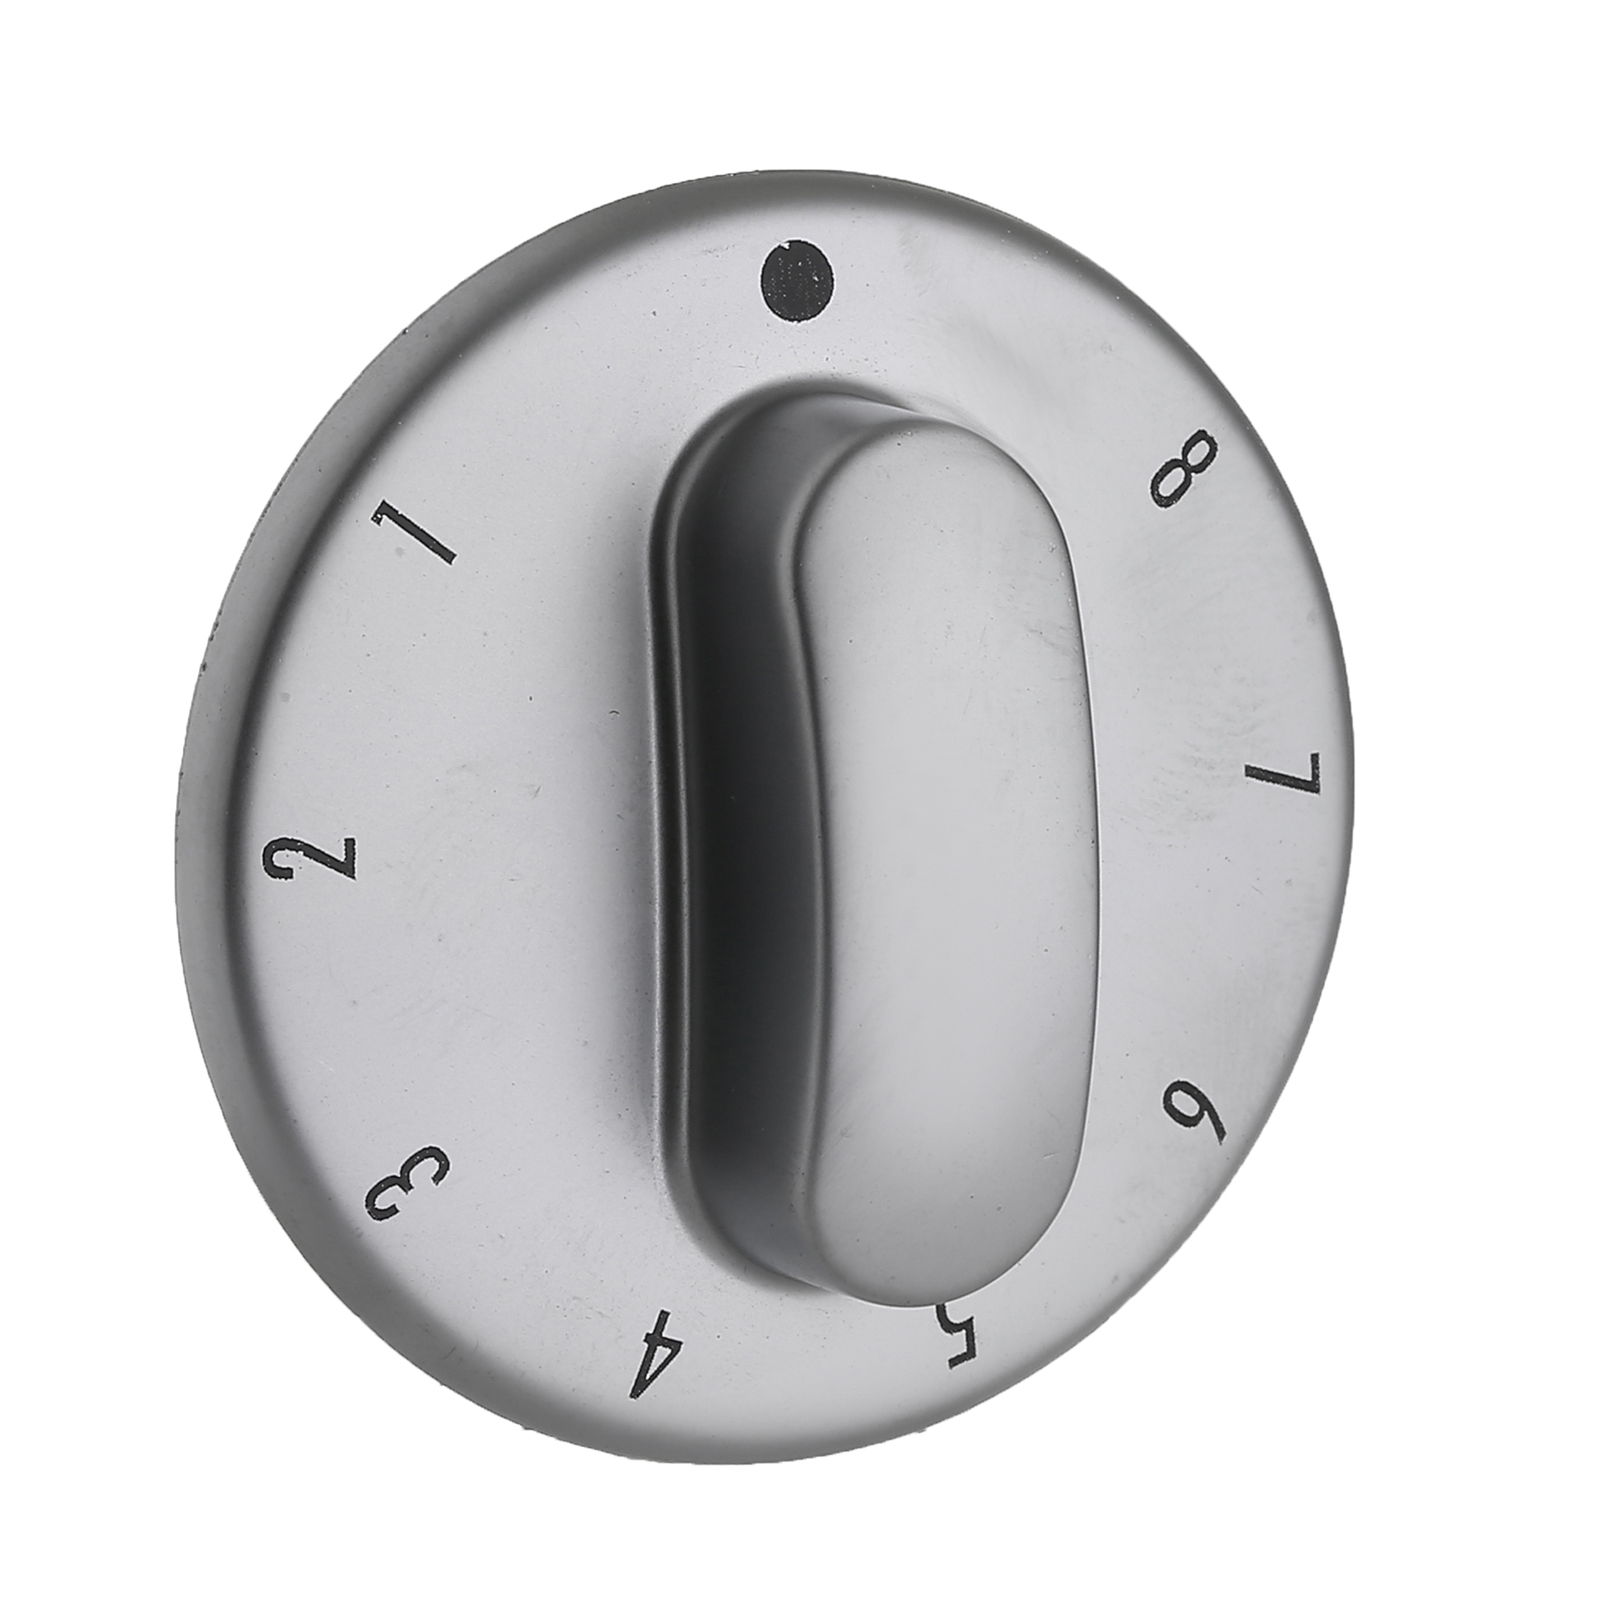 Stoves Cooker Oven Control Knob 081882154